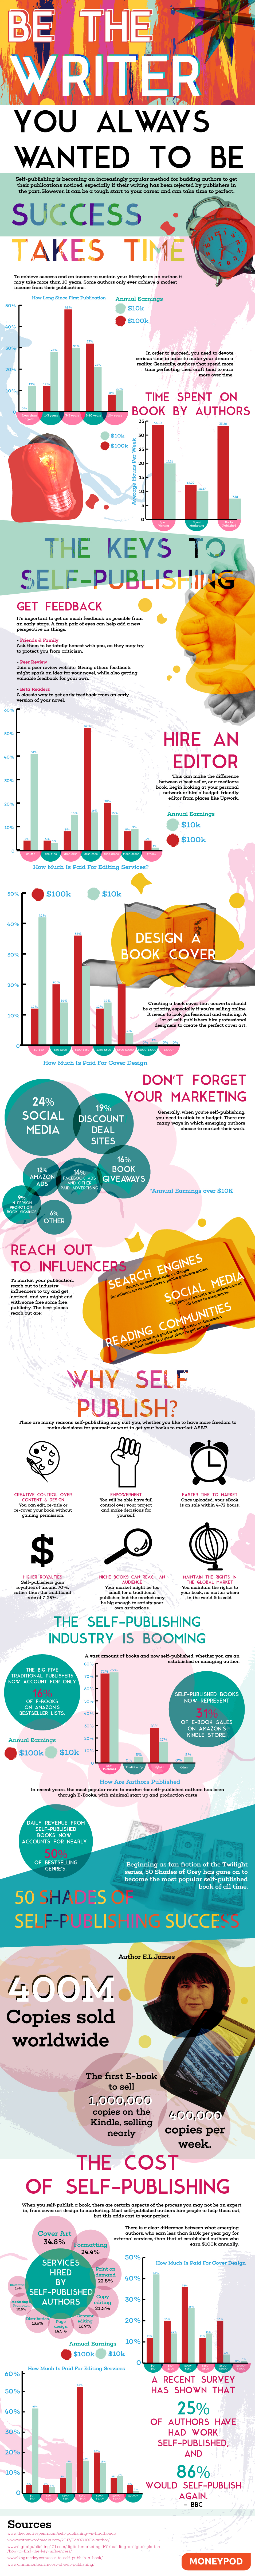 Self-publishing: Be The Writer You Always Wanted To Be